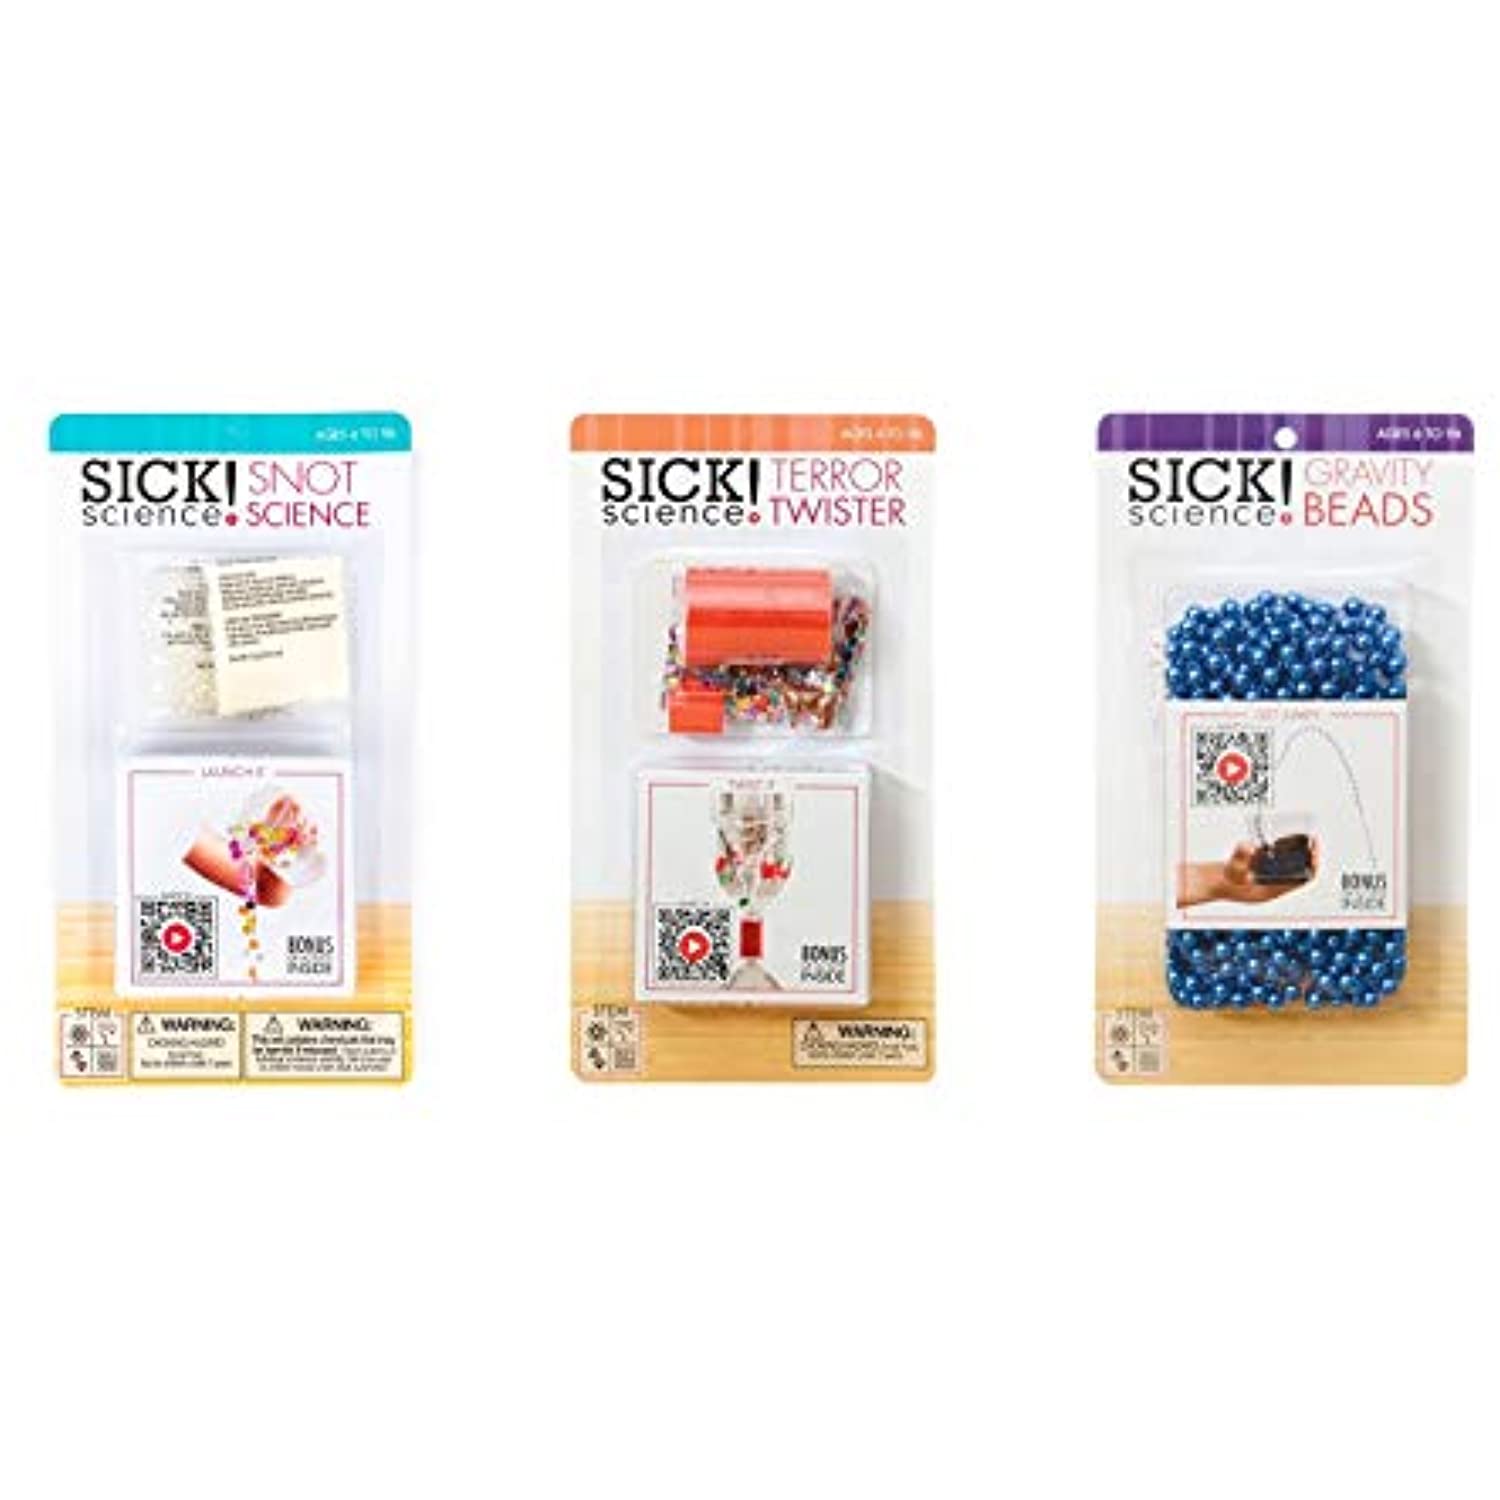 SICK Science! Snot Science, Terror Twister, Gravity Beads 3-Pack